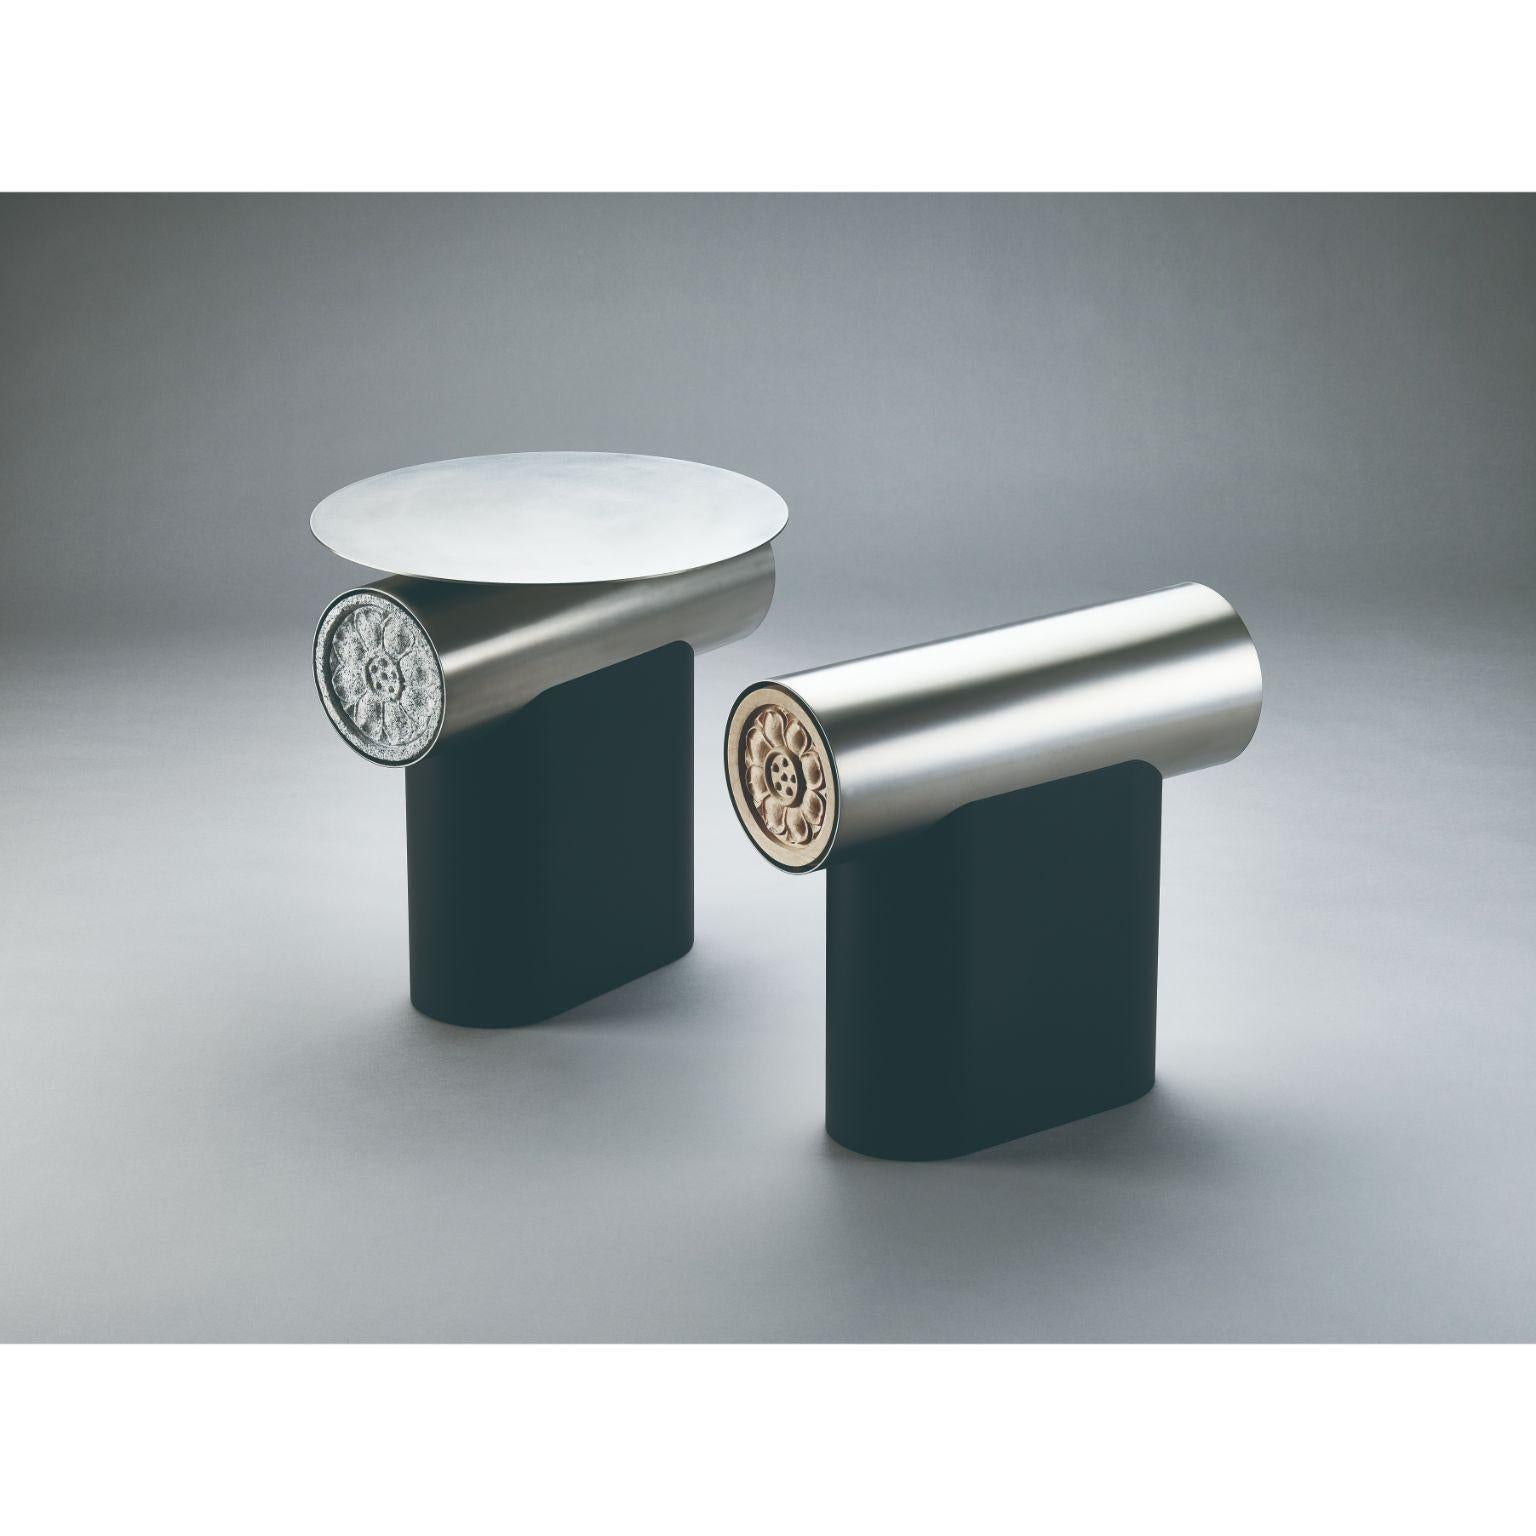 Set of 2 Heritage Gwol stool and table by Lee Jung Hoon
Dimensions: D46 x W44 x H45cm and D46 x W16.3 x H43.5cm
Materials: Stainless Steel, Steel, Granite, Maple.

The Heritage series, created by designer Lee Jung-hoon is a collection of